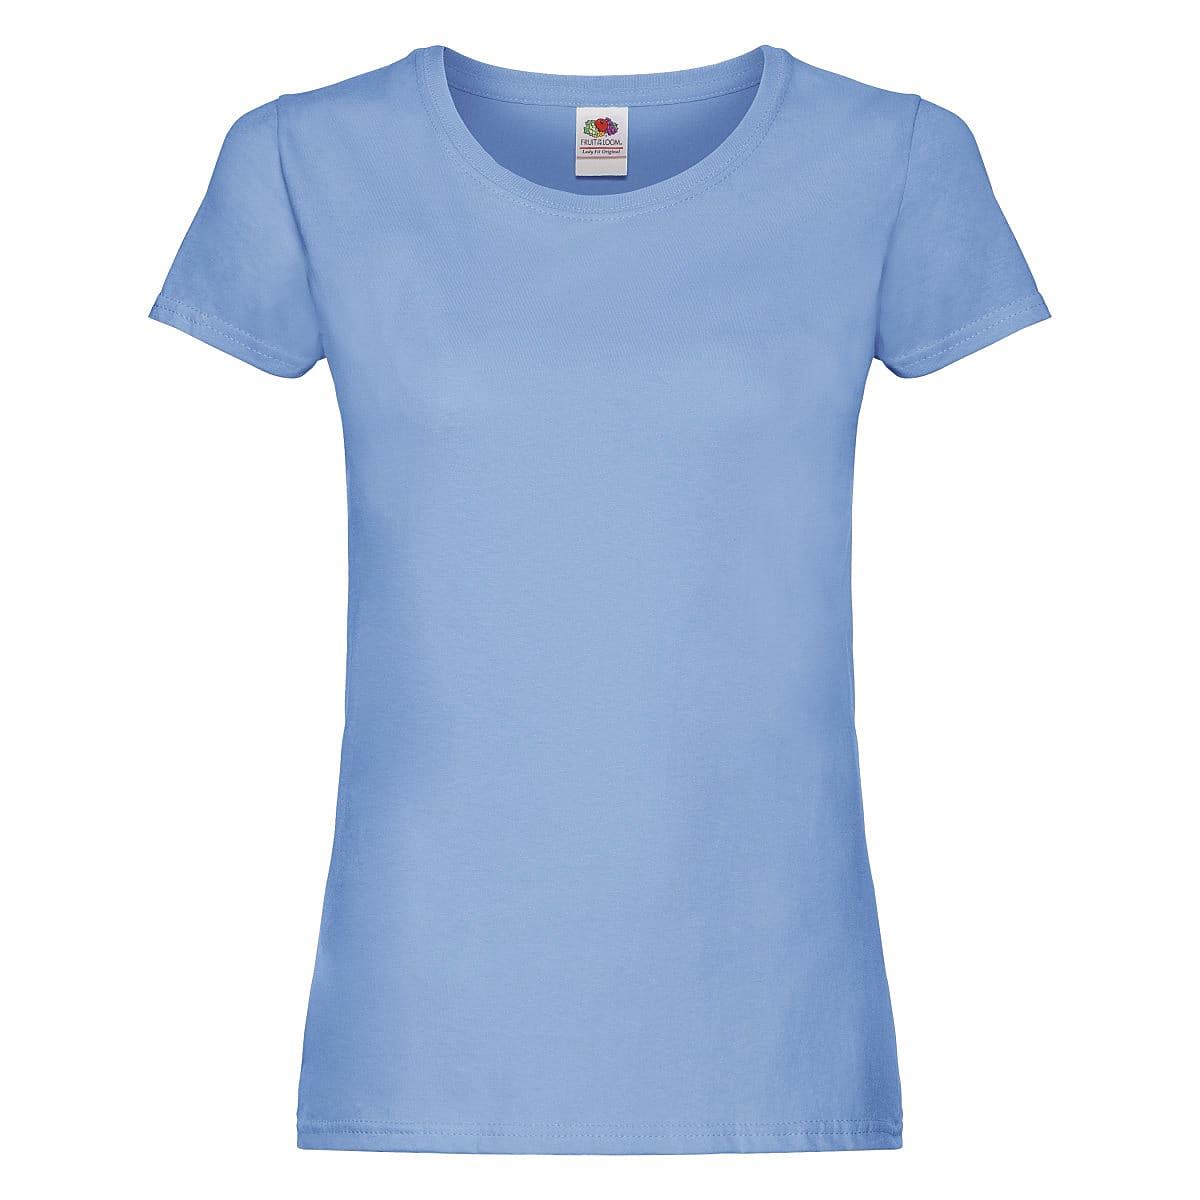 Fruit Of The Loom Lady Fit Original T-Shirt in Sky Blue (Product Code: 61420)